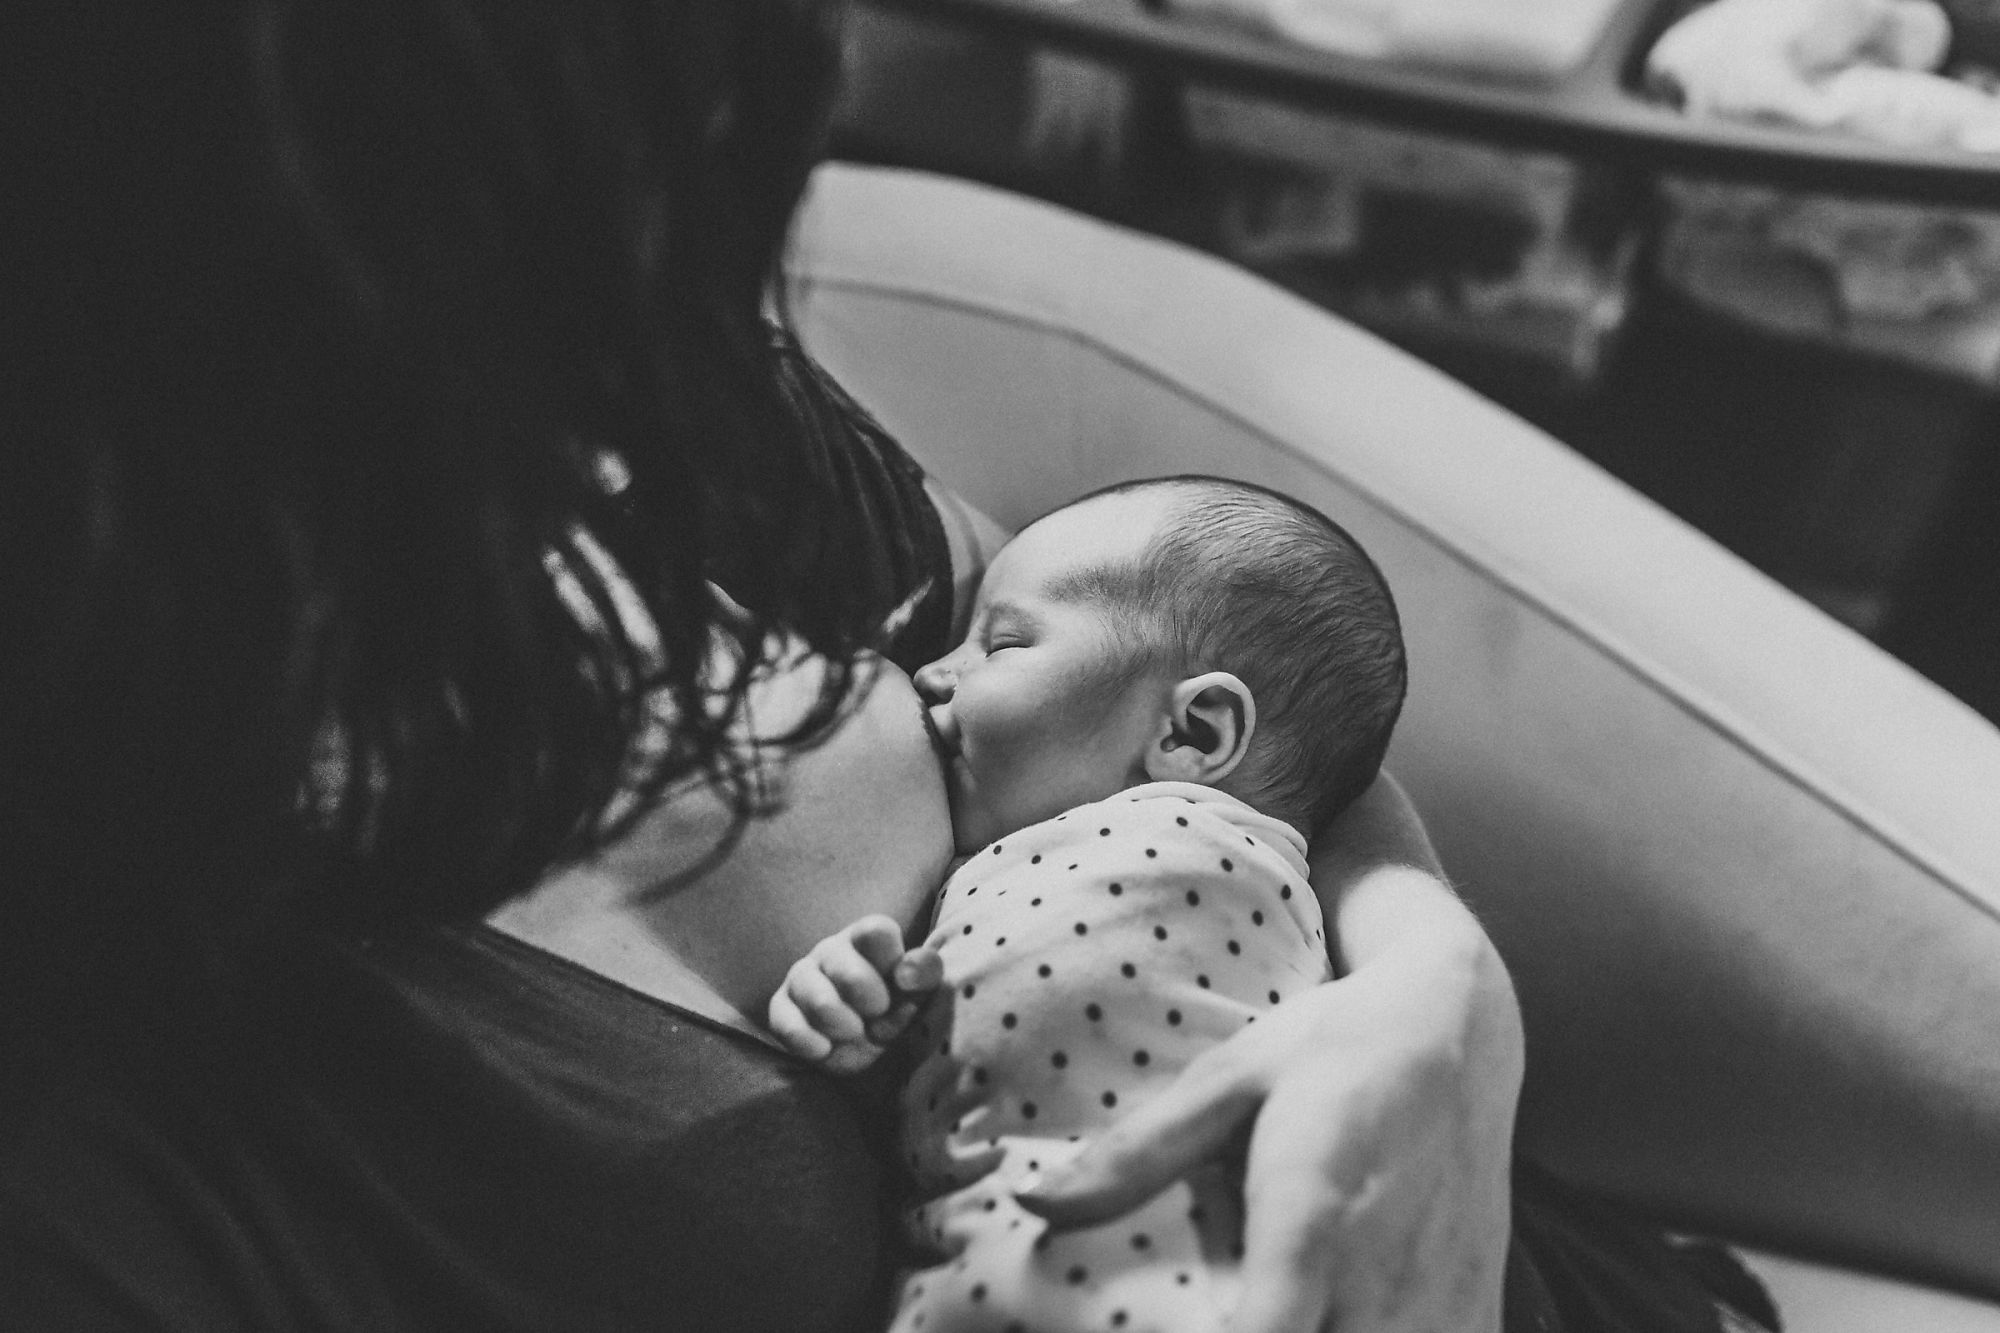 Documentary-style Dundas Newborn Photographer Jennifer Blaak captures a gentle moment between mother and baby as she breastfeeds at home during their newborn and family lifestyle photography session in Hamilton.